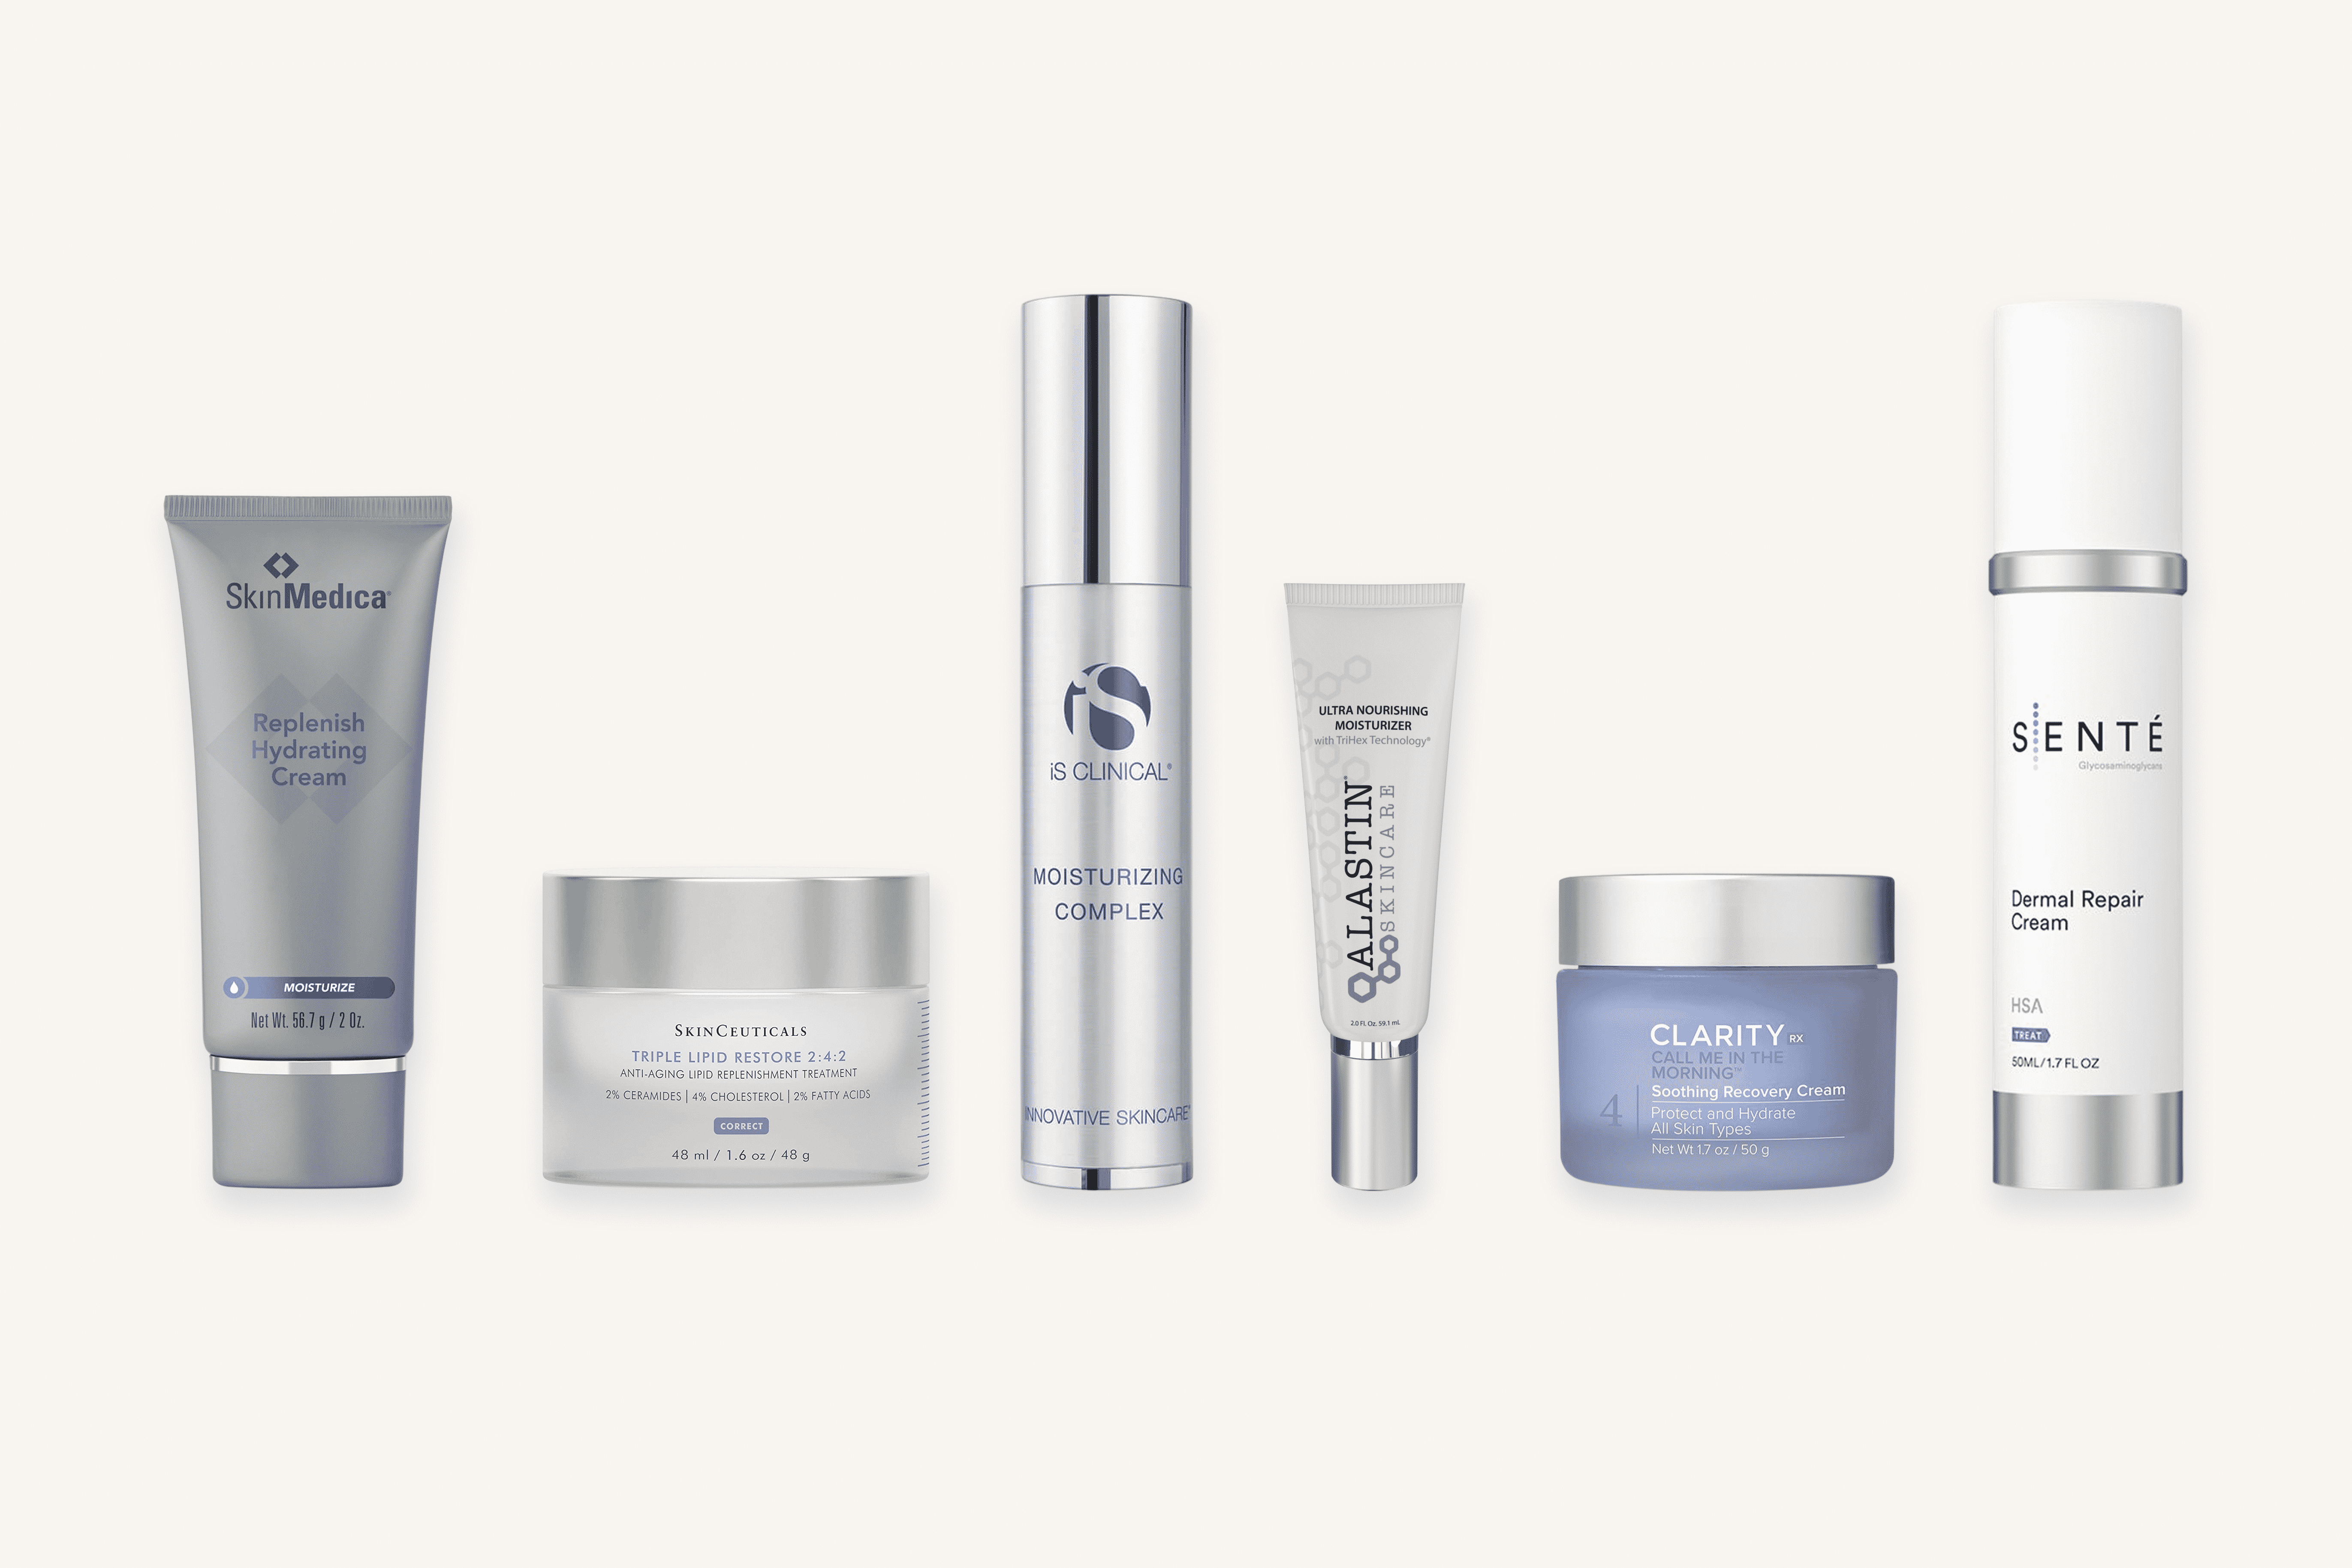 Learn why you should combine your hydrating ingredients and anti-agers in one product, according to dermatologists.